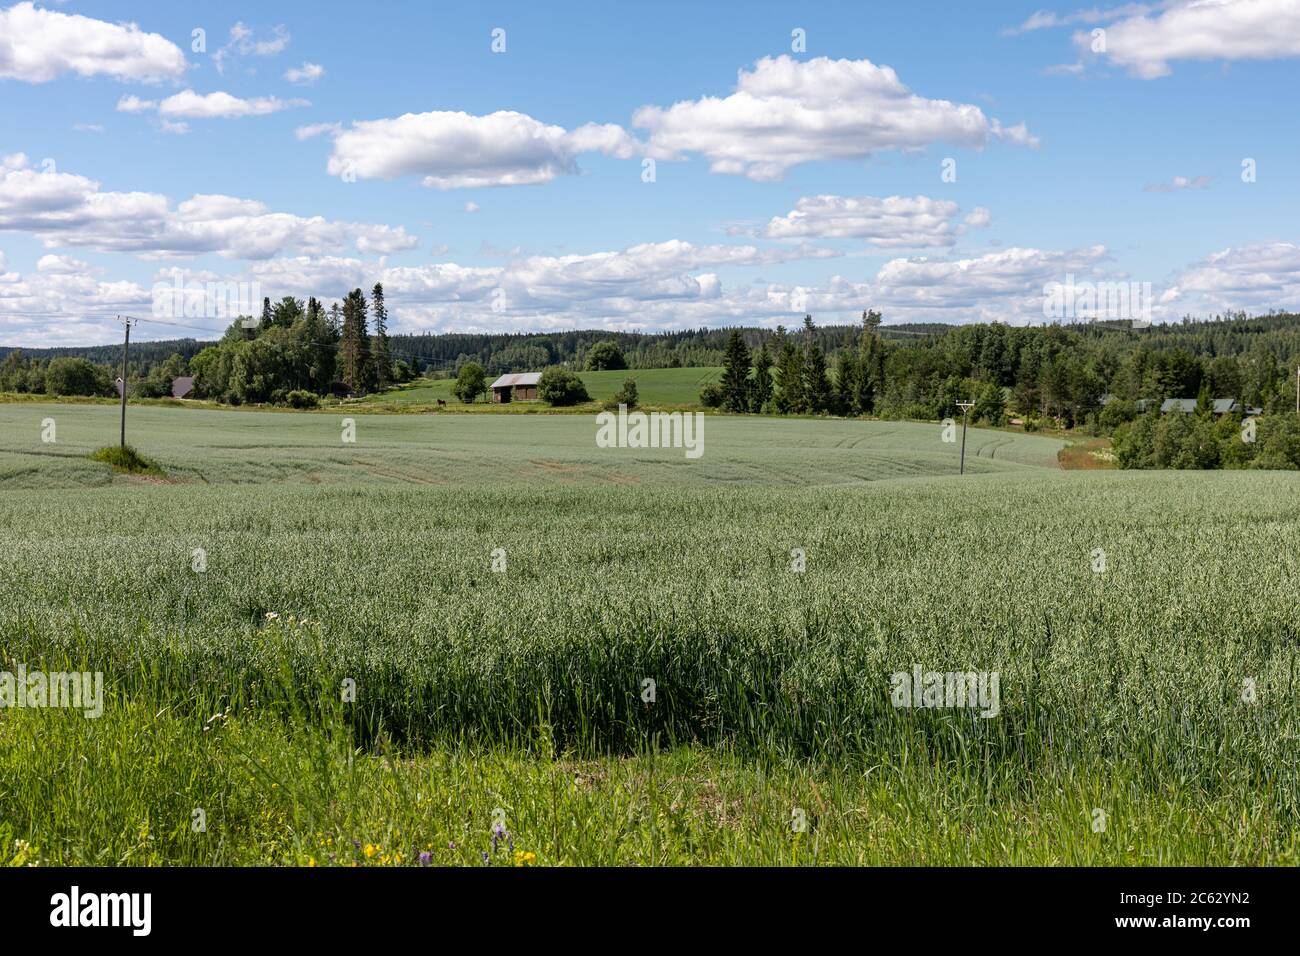 Finnish countryside view with green oat (Avena sativa) field in Orivesi, Finland Stock Photo